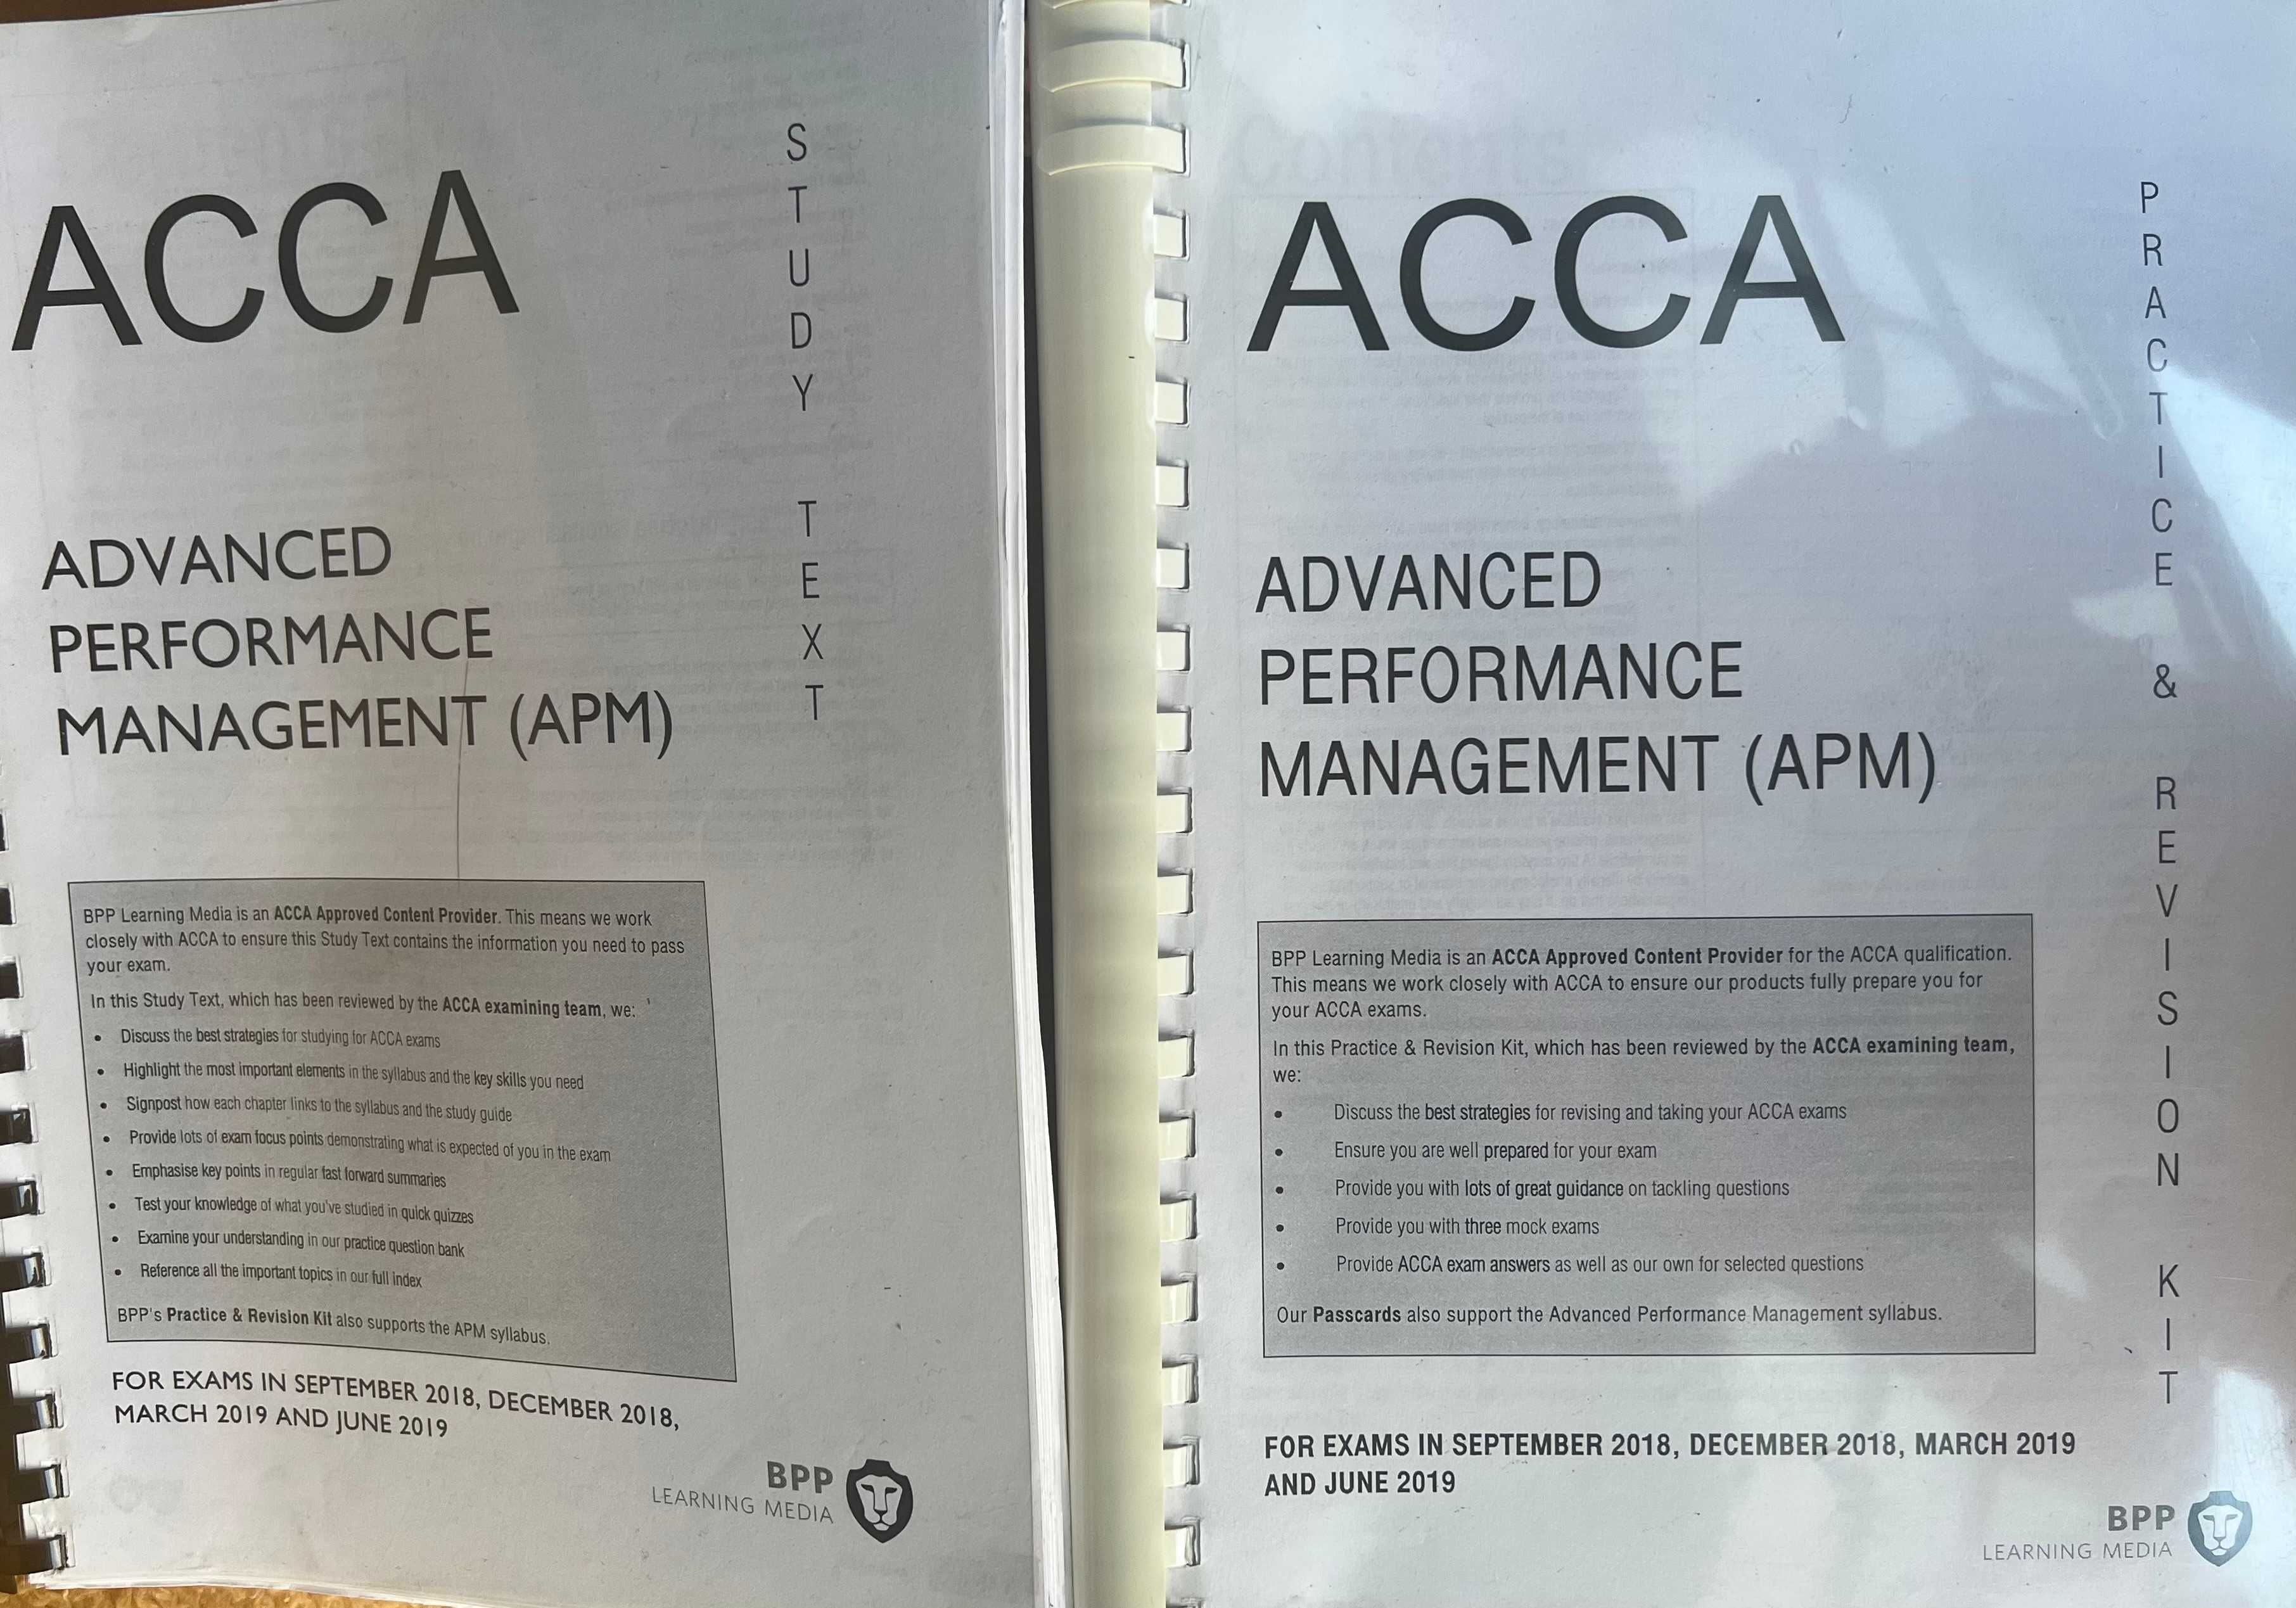 Carti ACCA (F1-P7) Study Text + Practice & Revision Kit